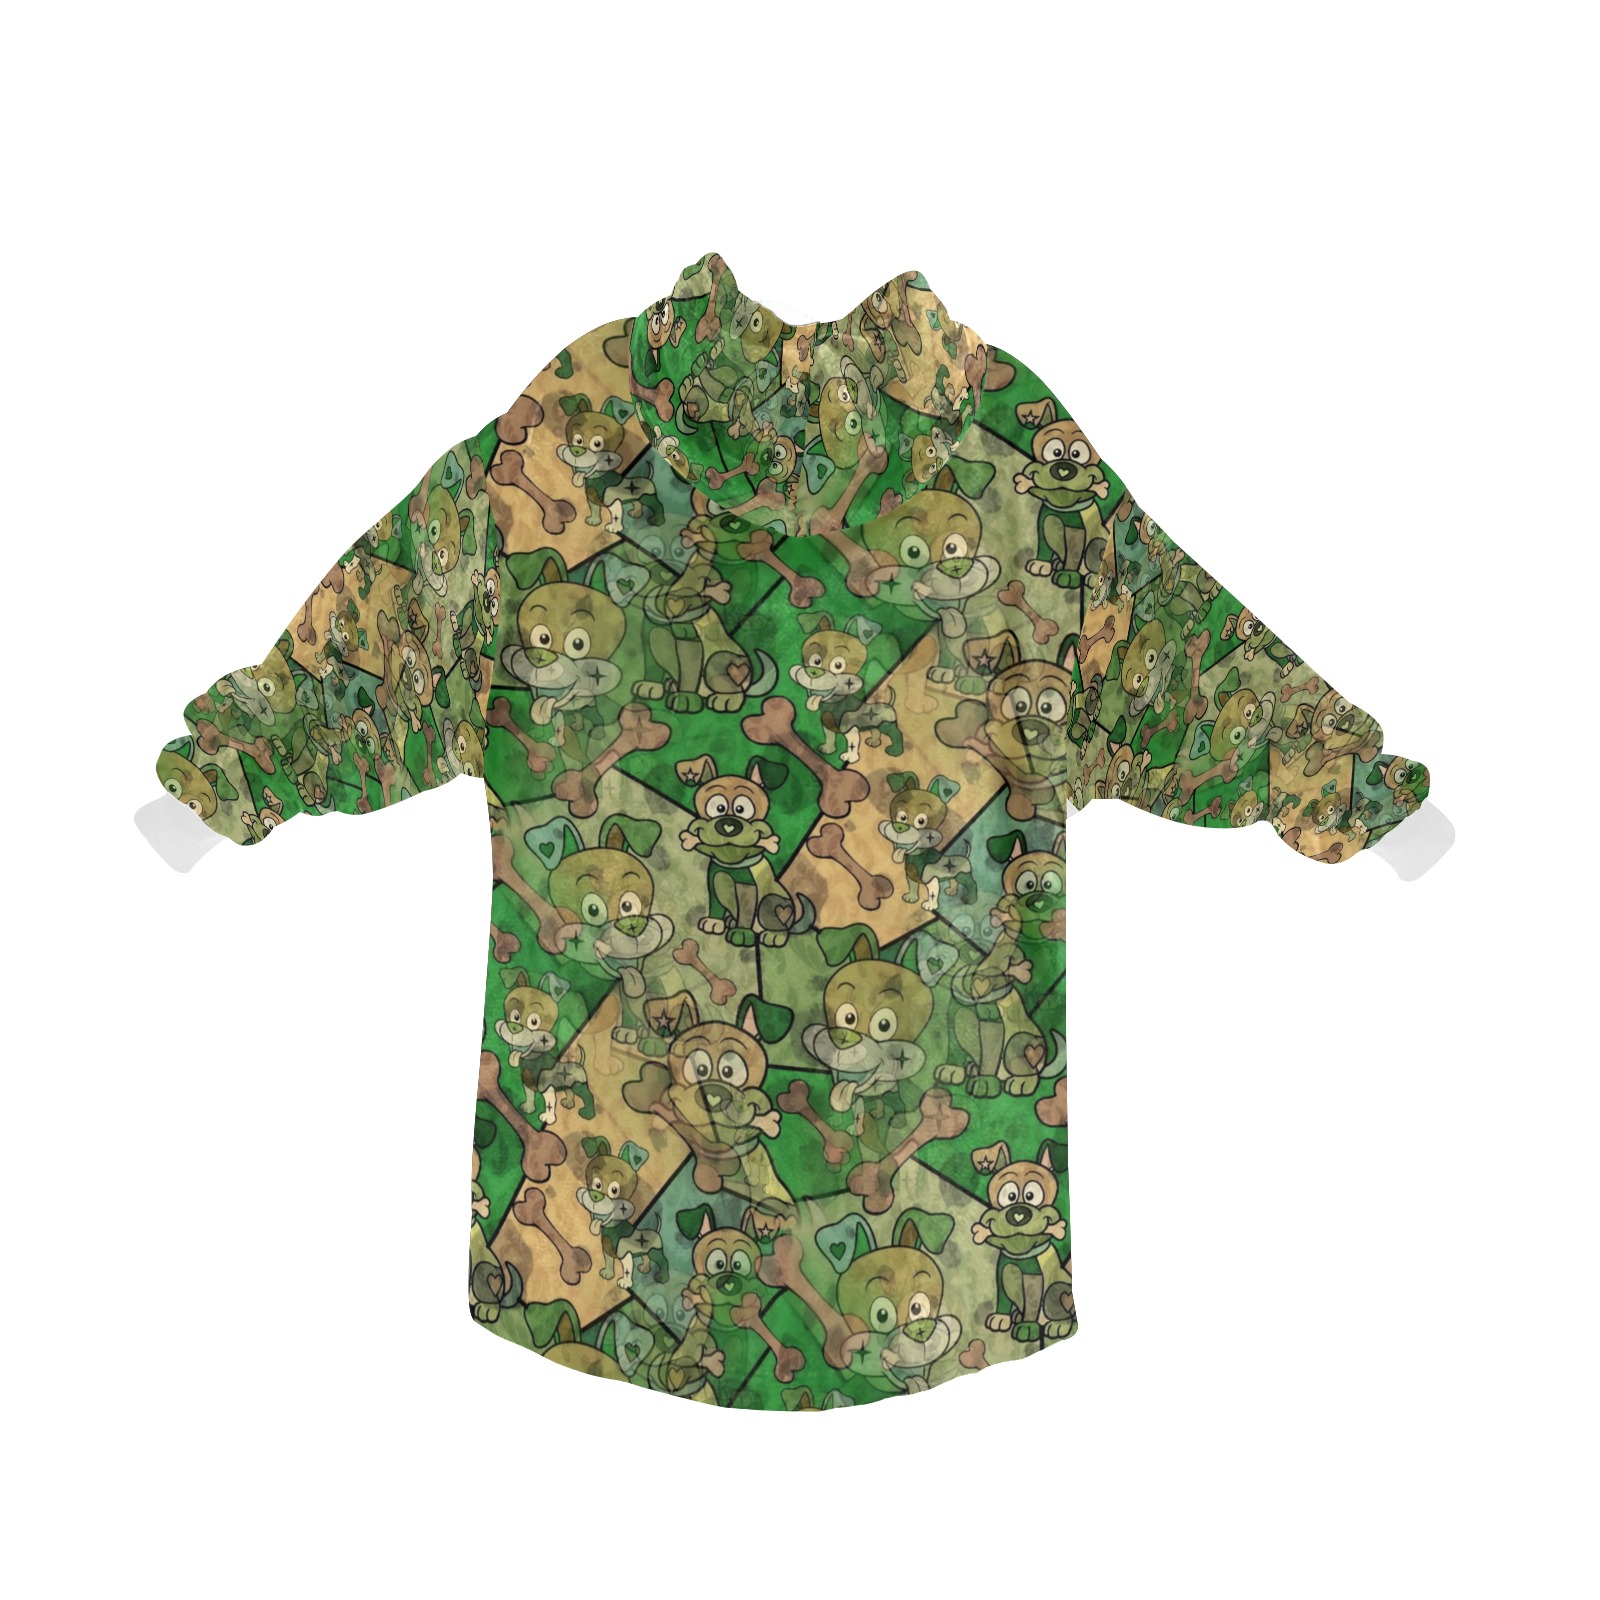 Camouflage Dogs by Nico Bielow Blanket Hoodie for Men